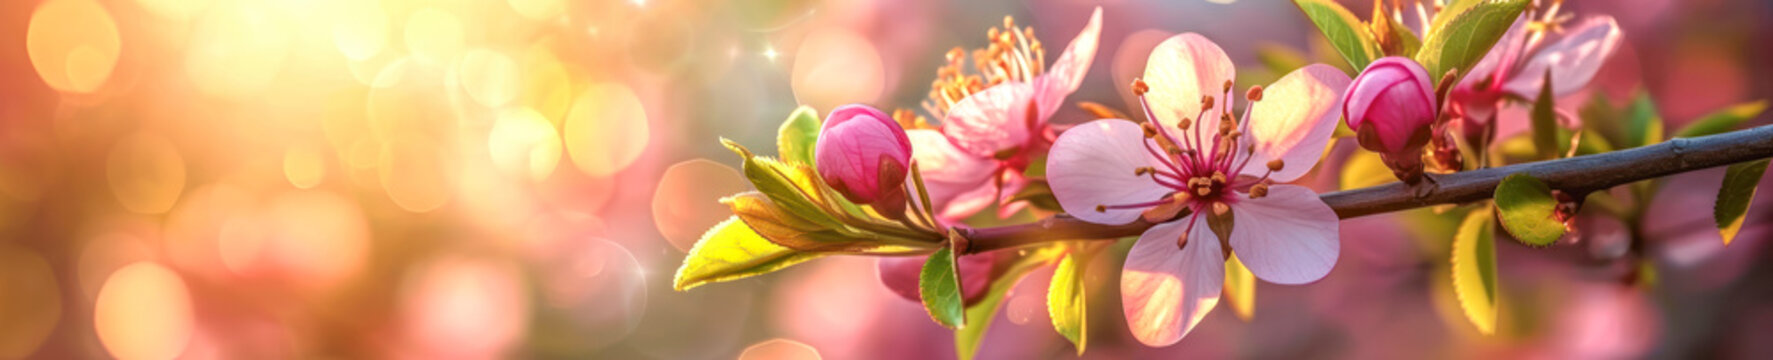 A sprig of peach with blooming pink flowers and young green leaves. Blooming peach on a magical warm spring background with bokeh. Long banner with space for text